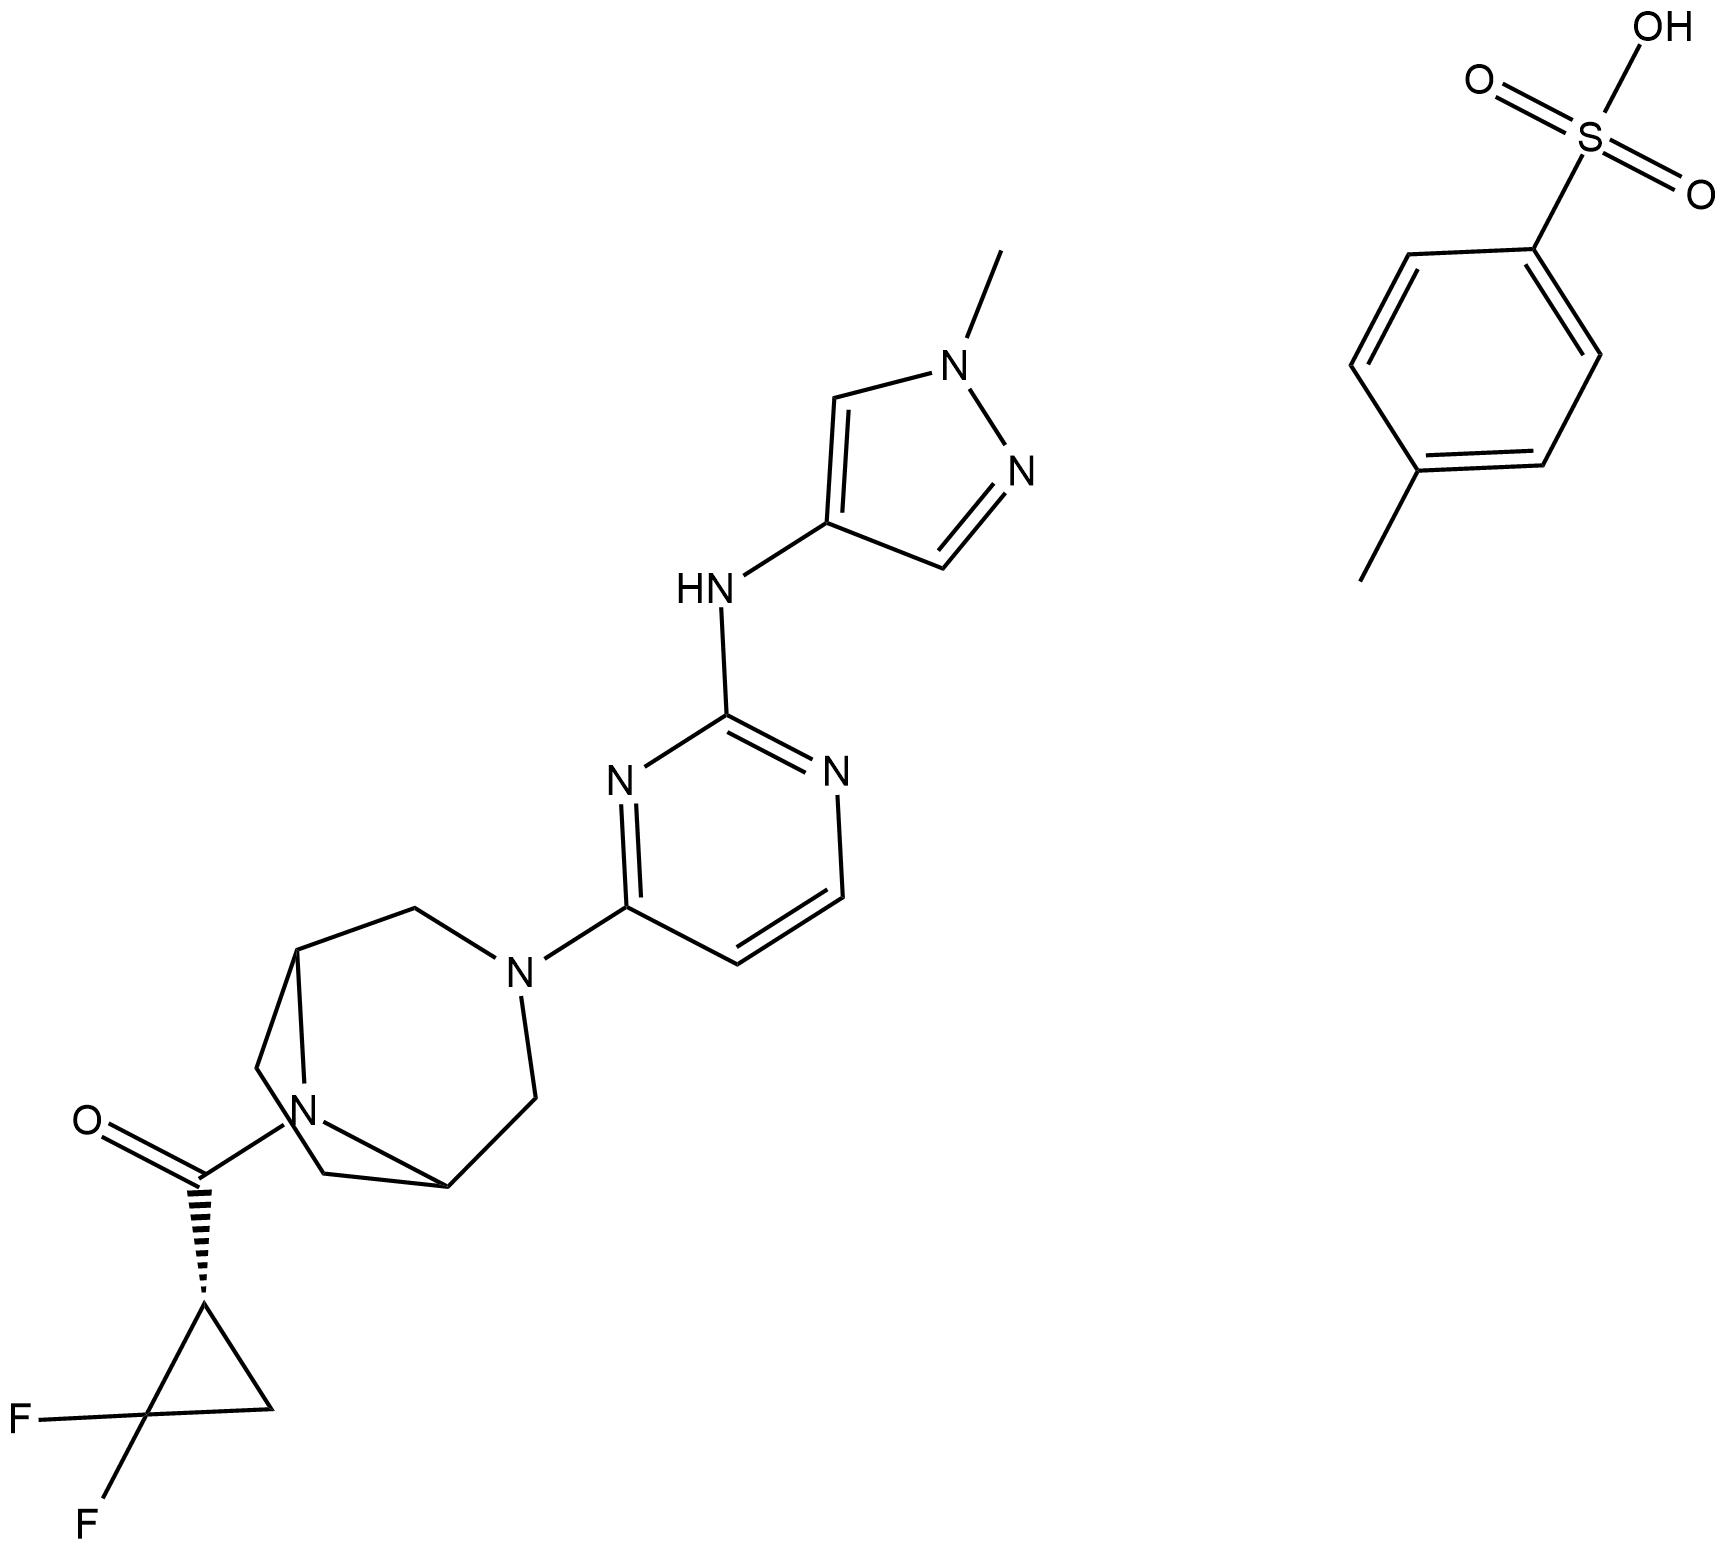 PF-06700841 P-Tosylate  Chemical Structure